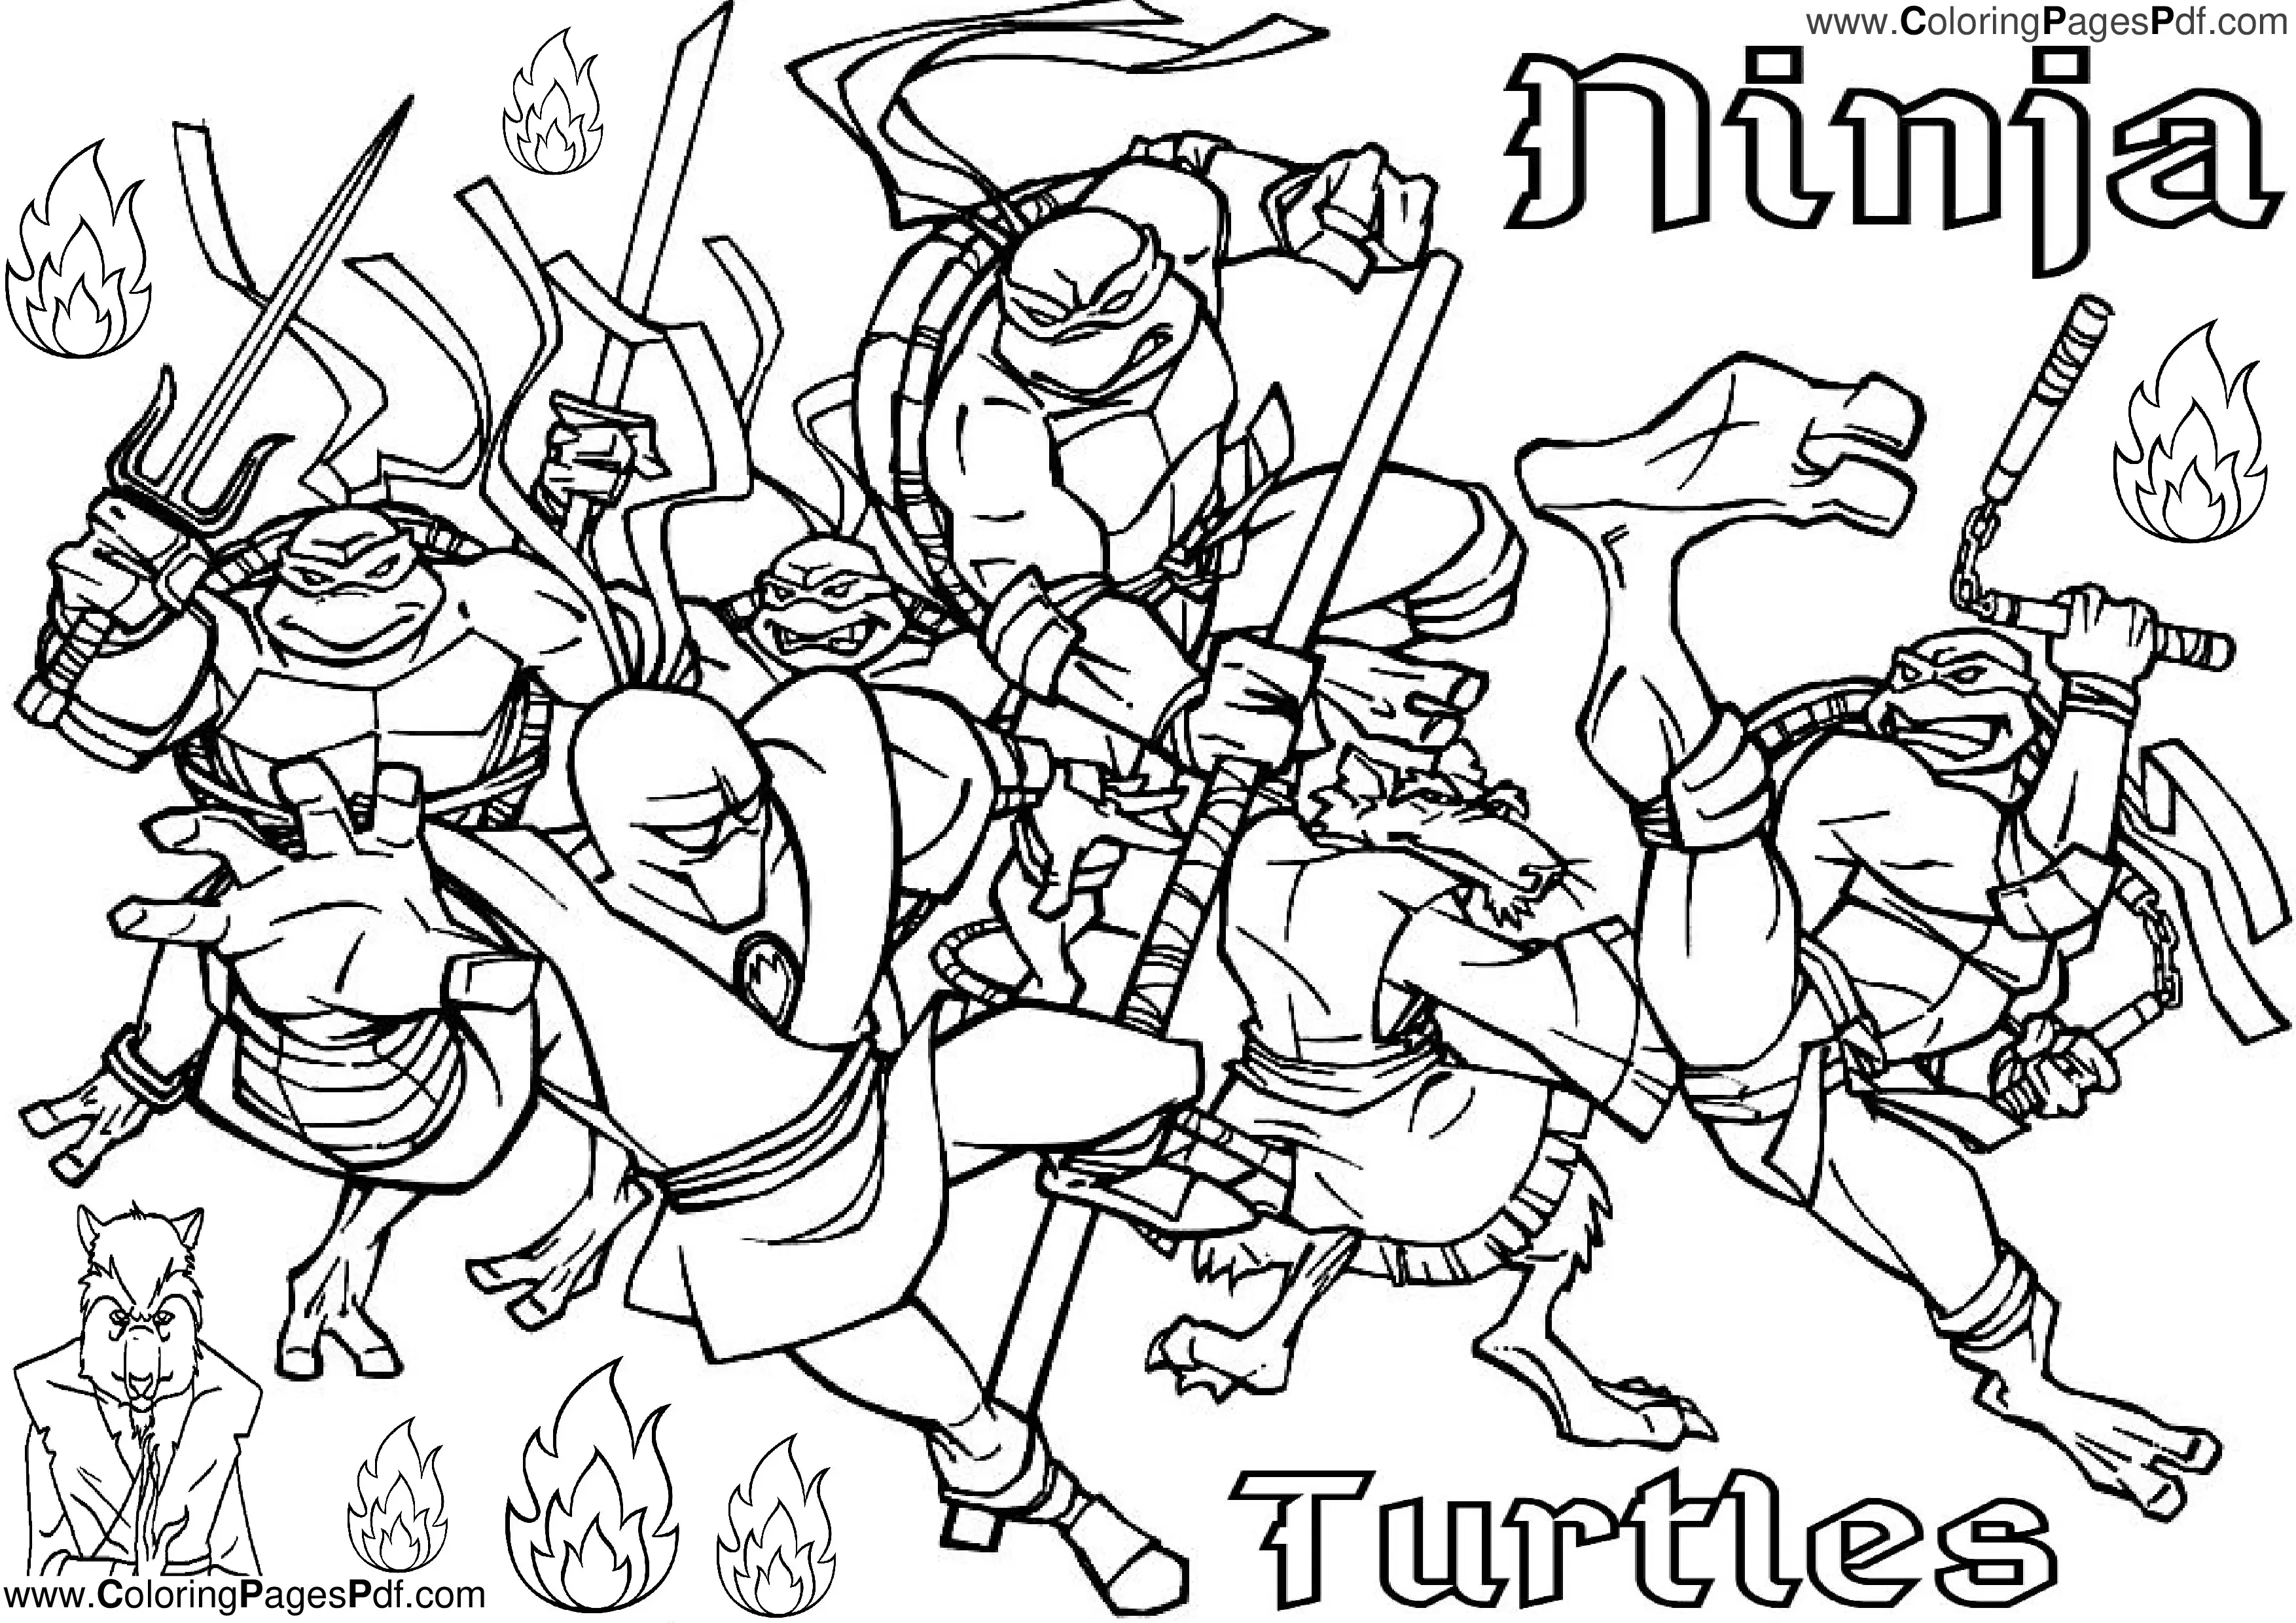 Ninja turtles coloring pages for adults